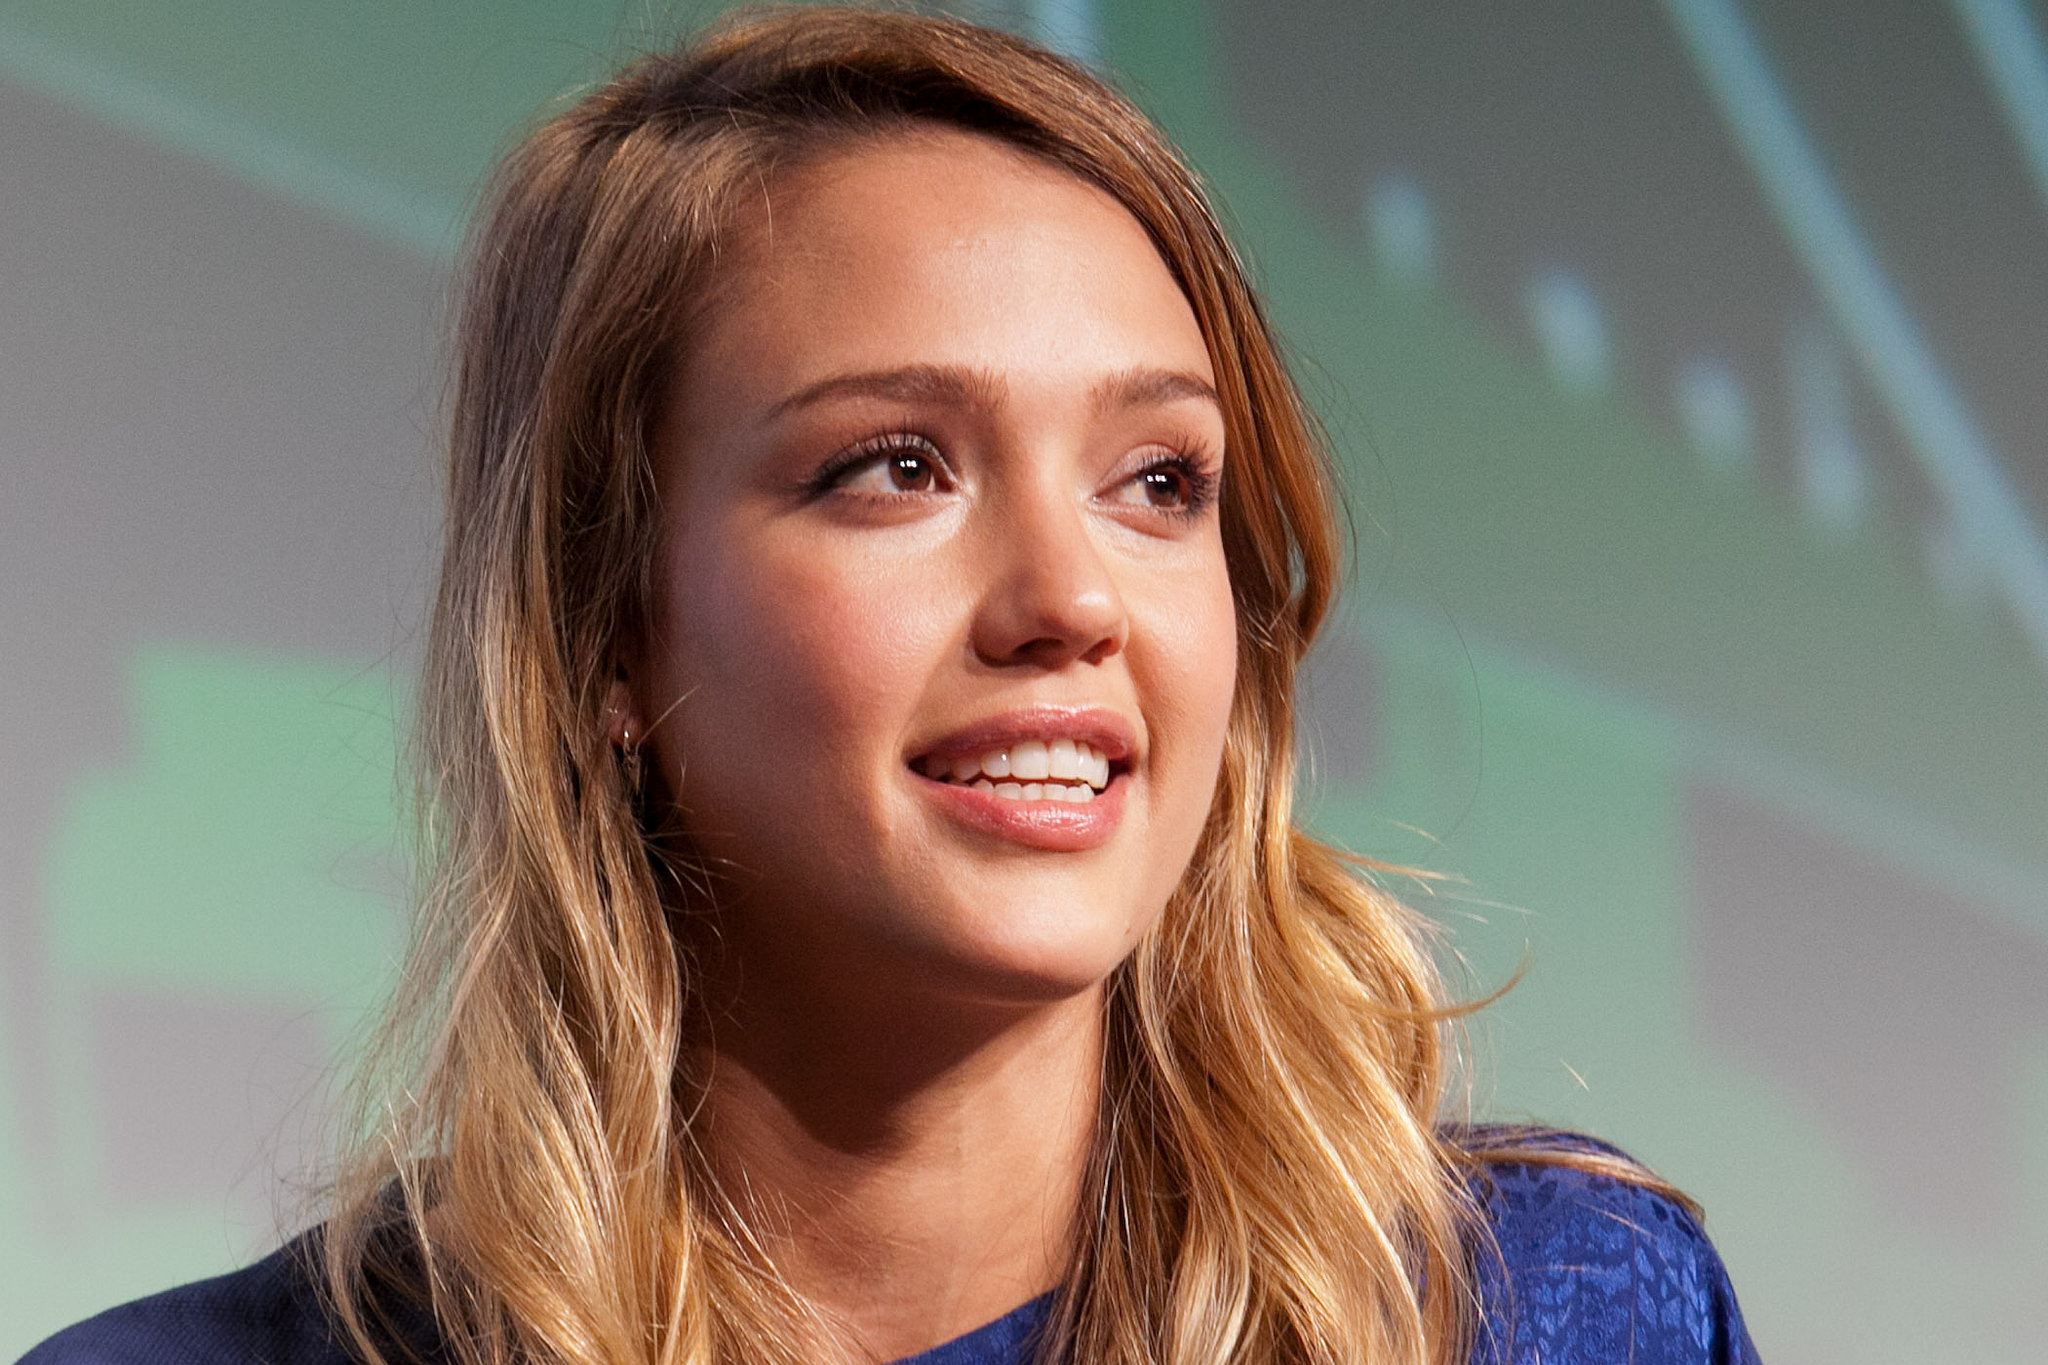 Actress Jessica Alba, co-founder of The Honest Company, in 2012